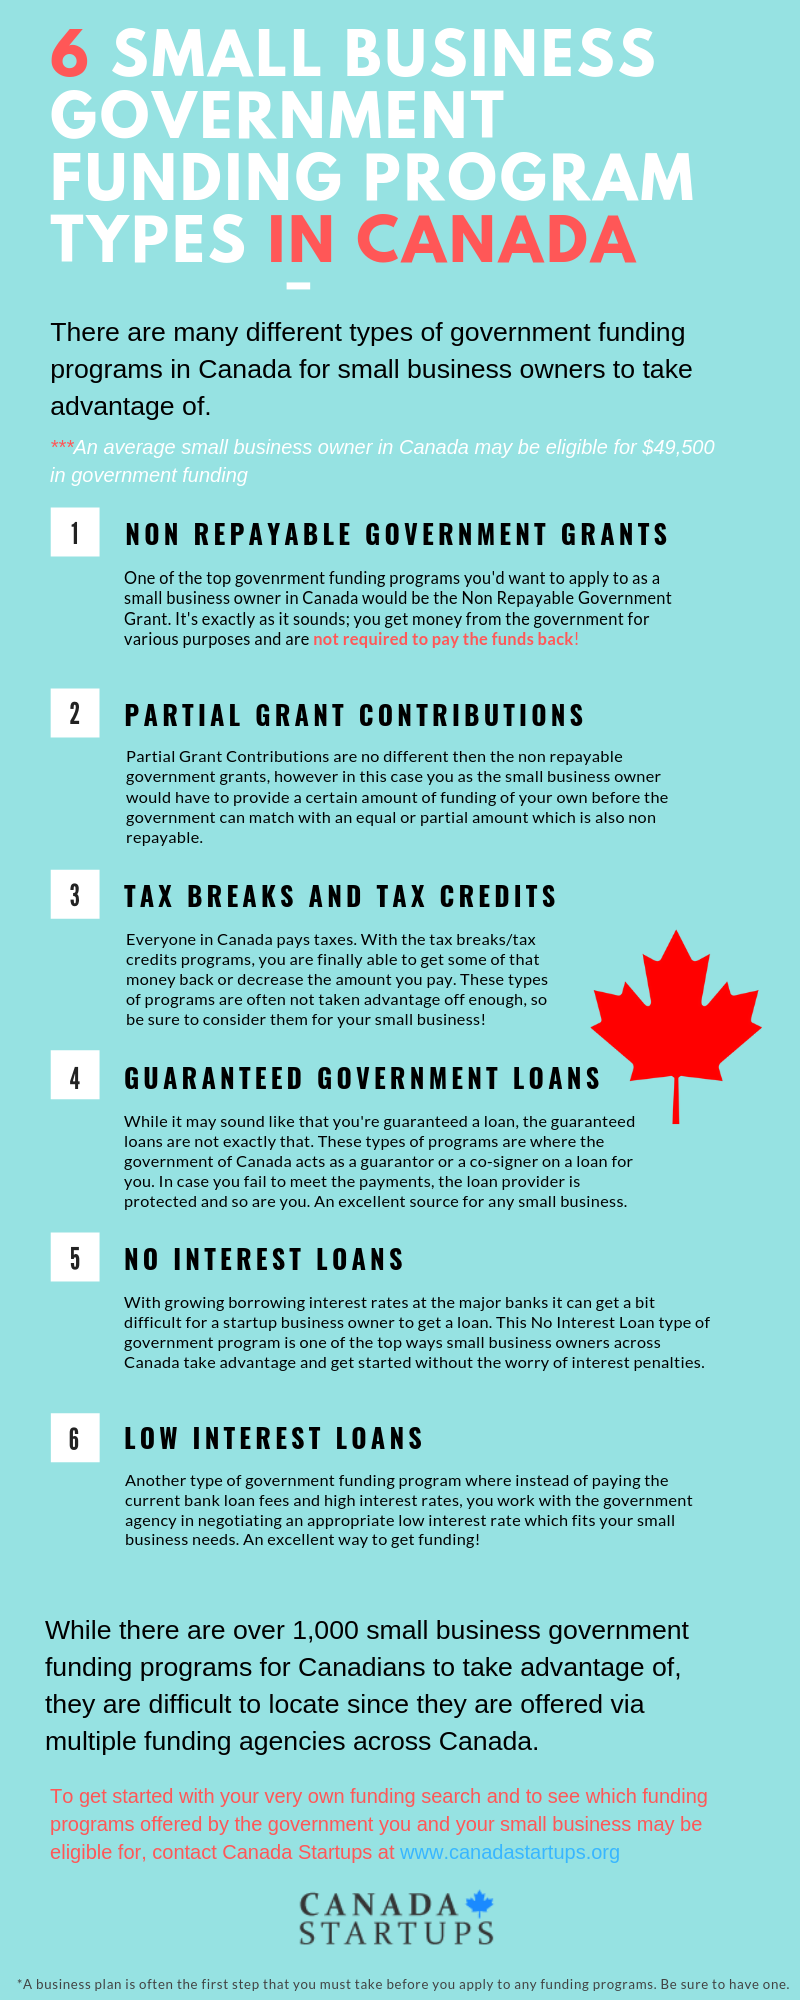 6 SMALL BUSINESS GOVERNMENT FUNDING PROGRAM TYPES IN CANADA